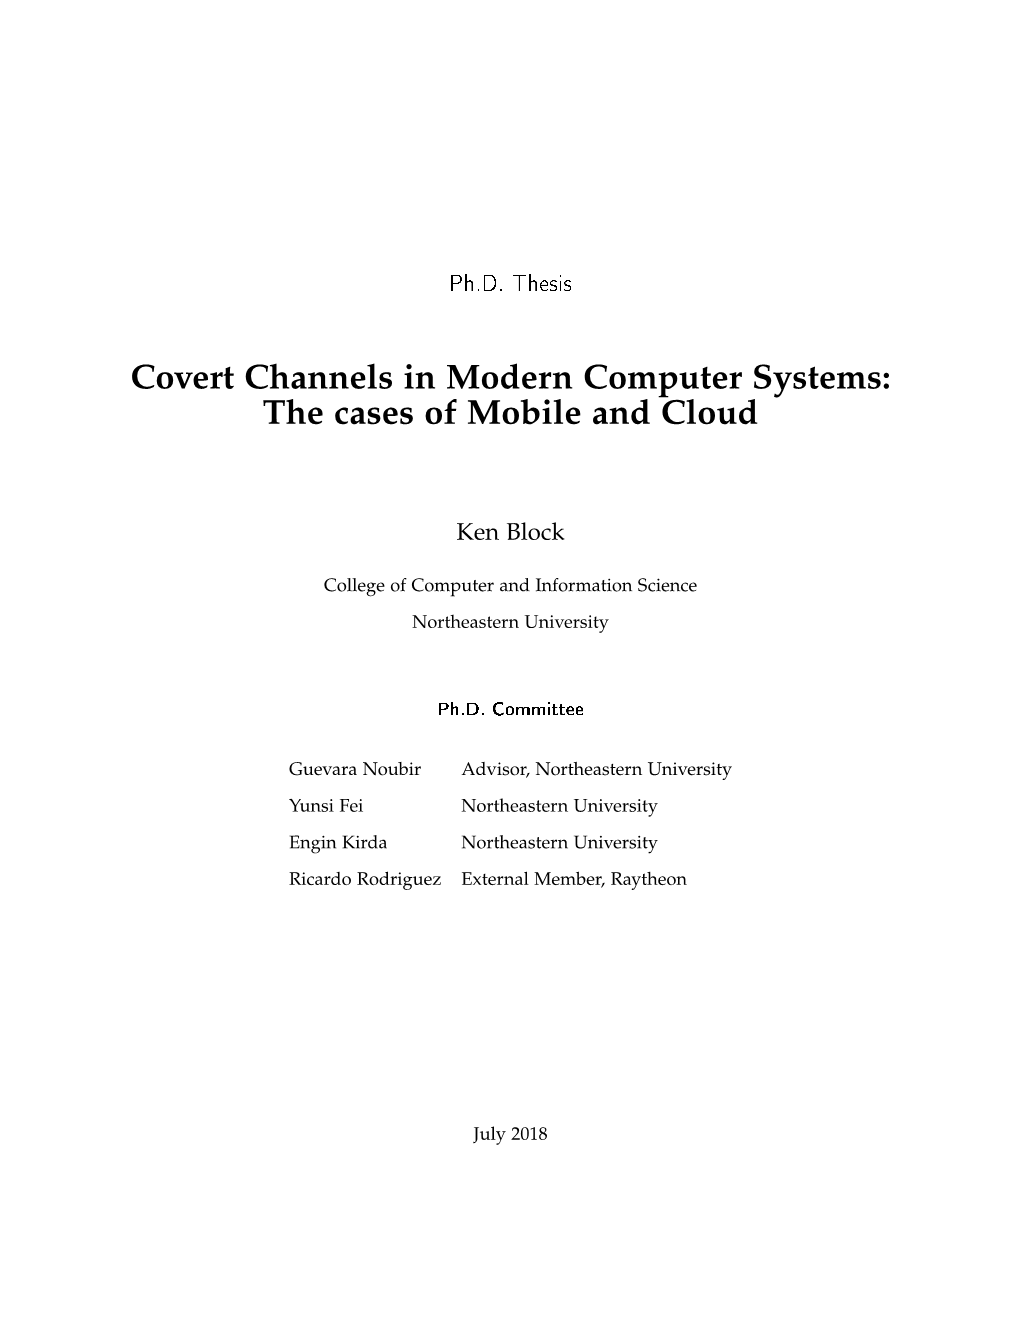 Covert Channels in Modern Computer Systems: the Cases of Mobile and Cloud